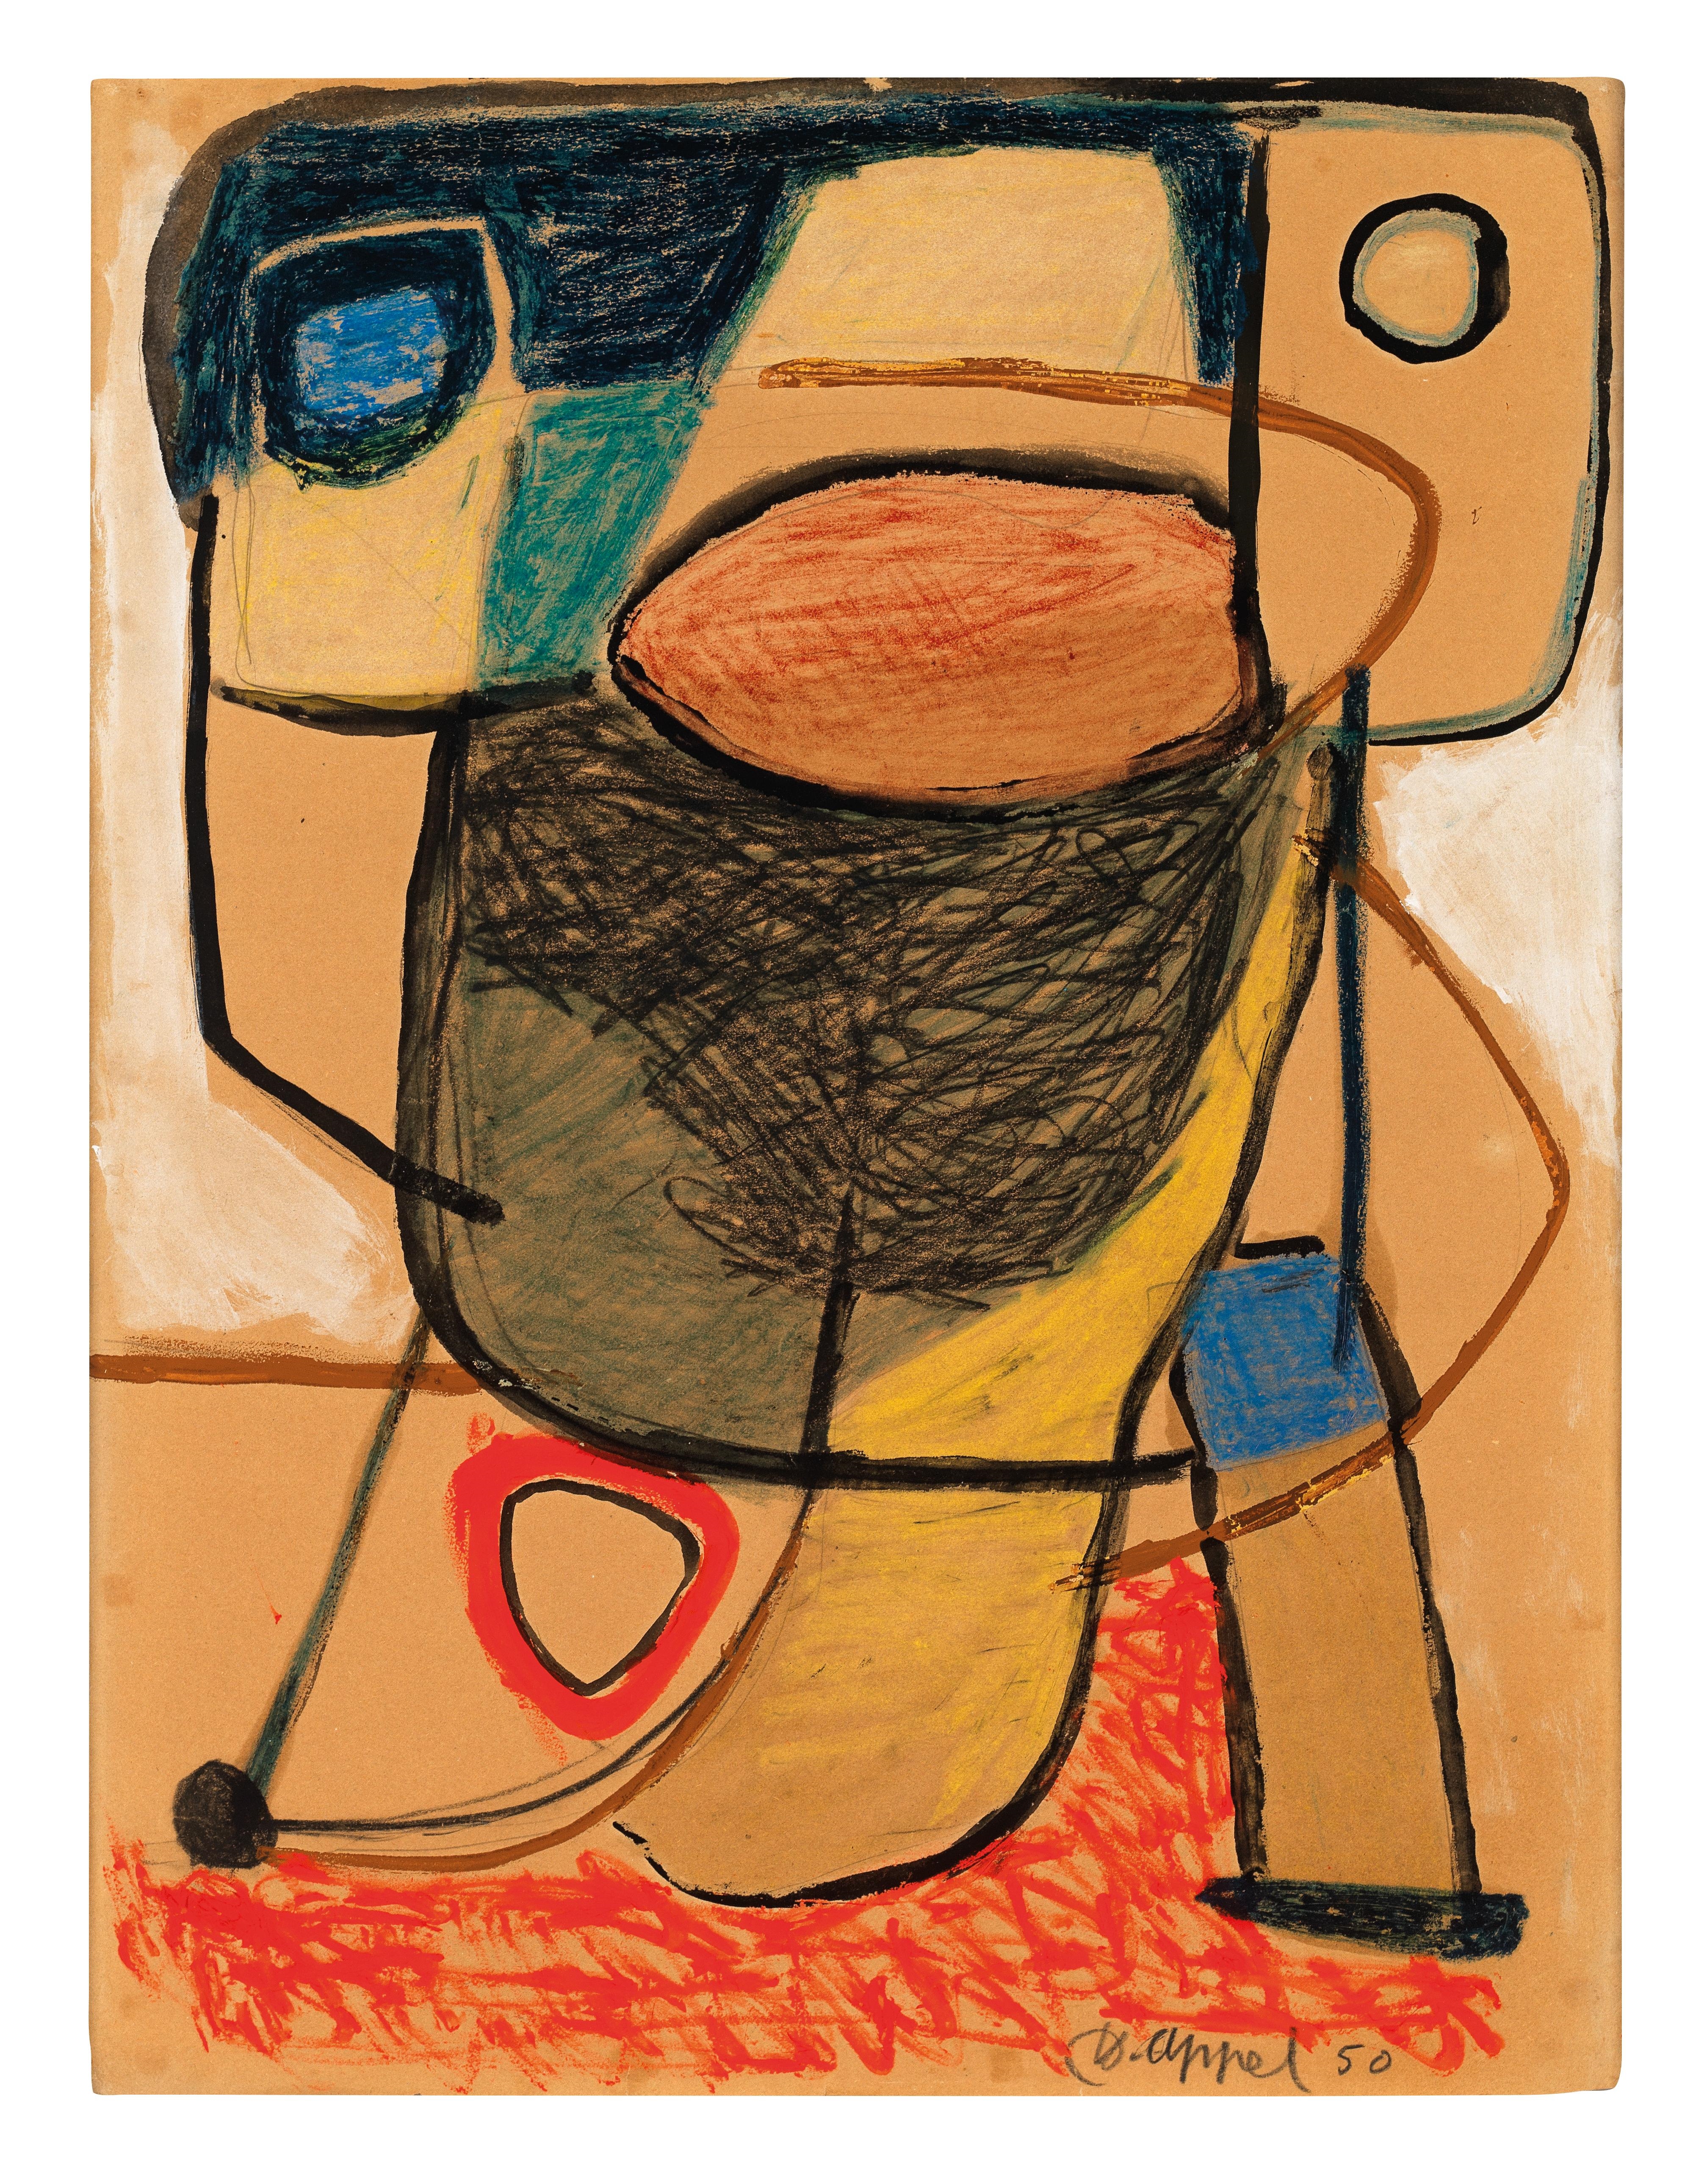 Artwork by Karel Appel, Untitled, Made of mixed media on brown paper